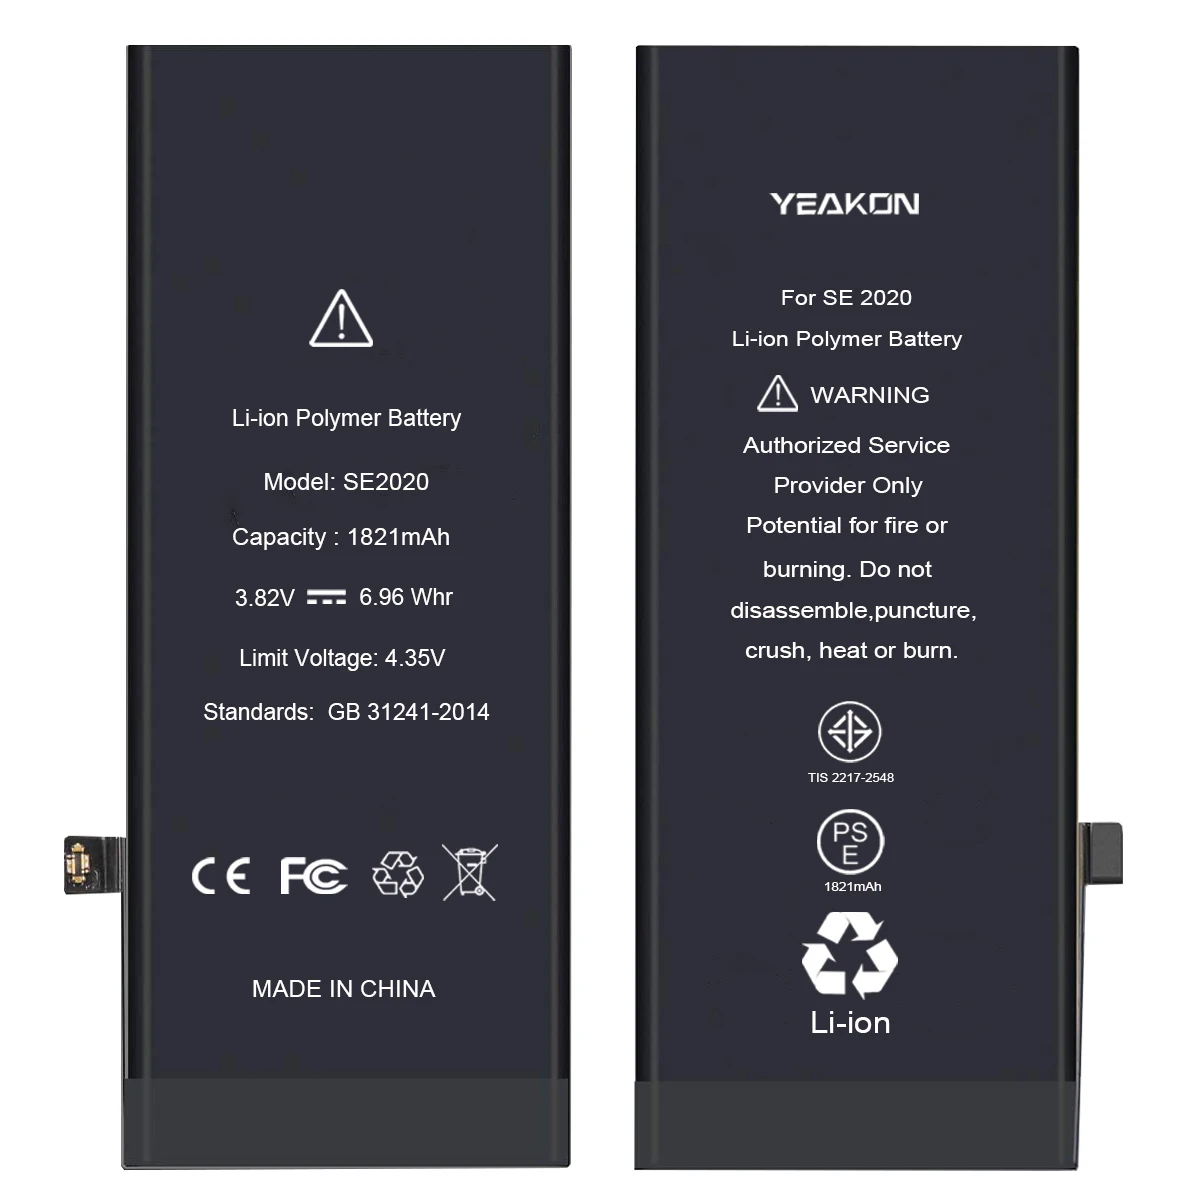 

YEAKON SE SE2 Battery Replacement For iPhone 5 5S 5C SE 6 6S 6P 6SP 7 7G 7P 8 8G 8P Plus X XS MAX XR 11 12 13 Pro MAX Batteries